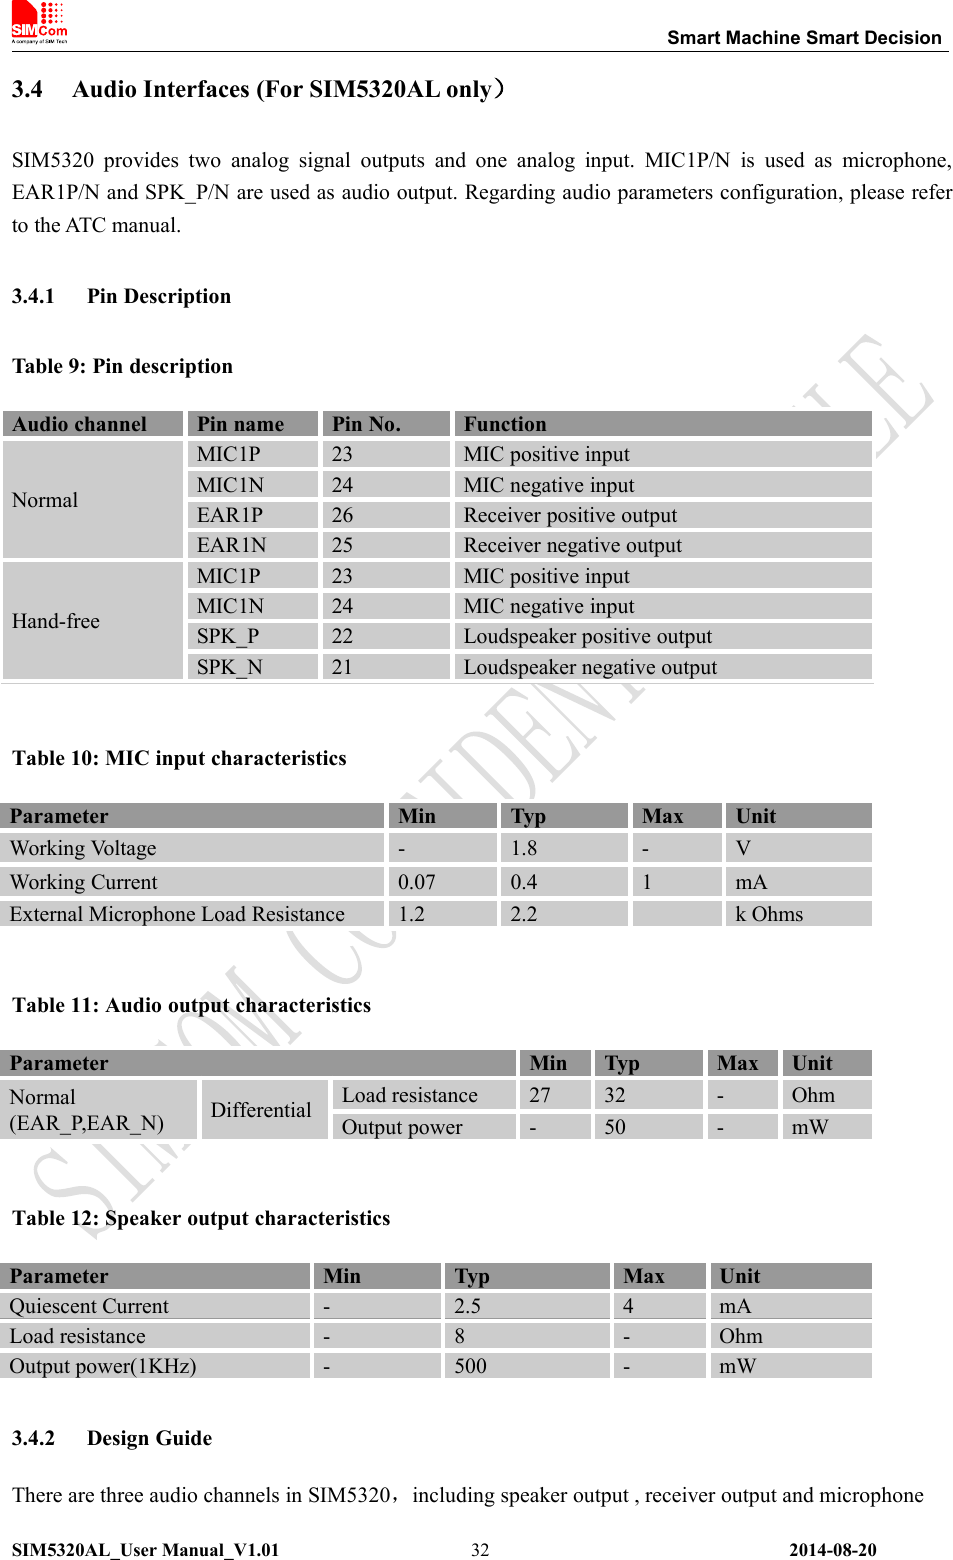 Smart Machine Smart DecisionSIM5320AL_User Manual_V1.01 2014-08-20323.4 Audio Interfaces (For SIM5320AL only）SIM5320 provides two analog signal outputs and one analog input. MIC1P/N is used as microphone,EAR1P/N and SPK_P/N are used as audio output. Regarding audio parameters configuration, please referto the ATC manual.3.4.1 Pin DescriptionTable 9: Pin descriptionAudio channel Pin name Pin No. FunctionNormalMIC1P23MIC positive inputMIC1N24MIC negative inputEAR1P26Receiver positive outputEAR1N 25 Receiver negative outputHand-freeMIC1P23MIC positive inputMIC1N24MIC negative inputSPK_P22Loudspeaker positive outputSPK_N 21 Loudspeaker negative outputTable 10: MIC input characteristicsParameter Min Typ Max UnitWorking Voltage - 1.8 - VWorking Current 0.07 0.4 1 mAExternal Microphone Load Resistance 1.2 2.2 k OhmsTable 11: Audio output characteristicsParameter Min Typ Max UnitNormal(EAR_P,EAR_N)DifferentialLoad resistance2732-OhmOutput power - 50 - mWTable 12: Speaker output characteristicsParameter Min Typ Max UnitQuiescent Current - 2.5 4 mALoad resistance - 8 - OhmOutput power(1KHz) - 500 - mW3.4.2 Design GuideThere are three audio channels in SIM5320，including speaker output , receiver output and microphone